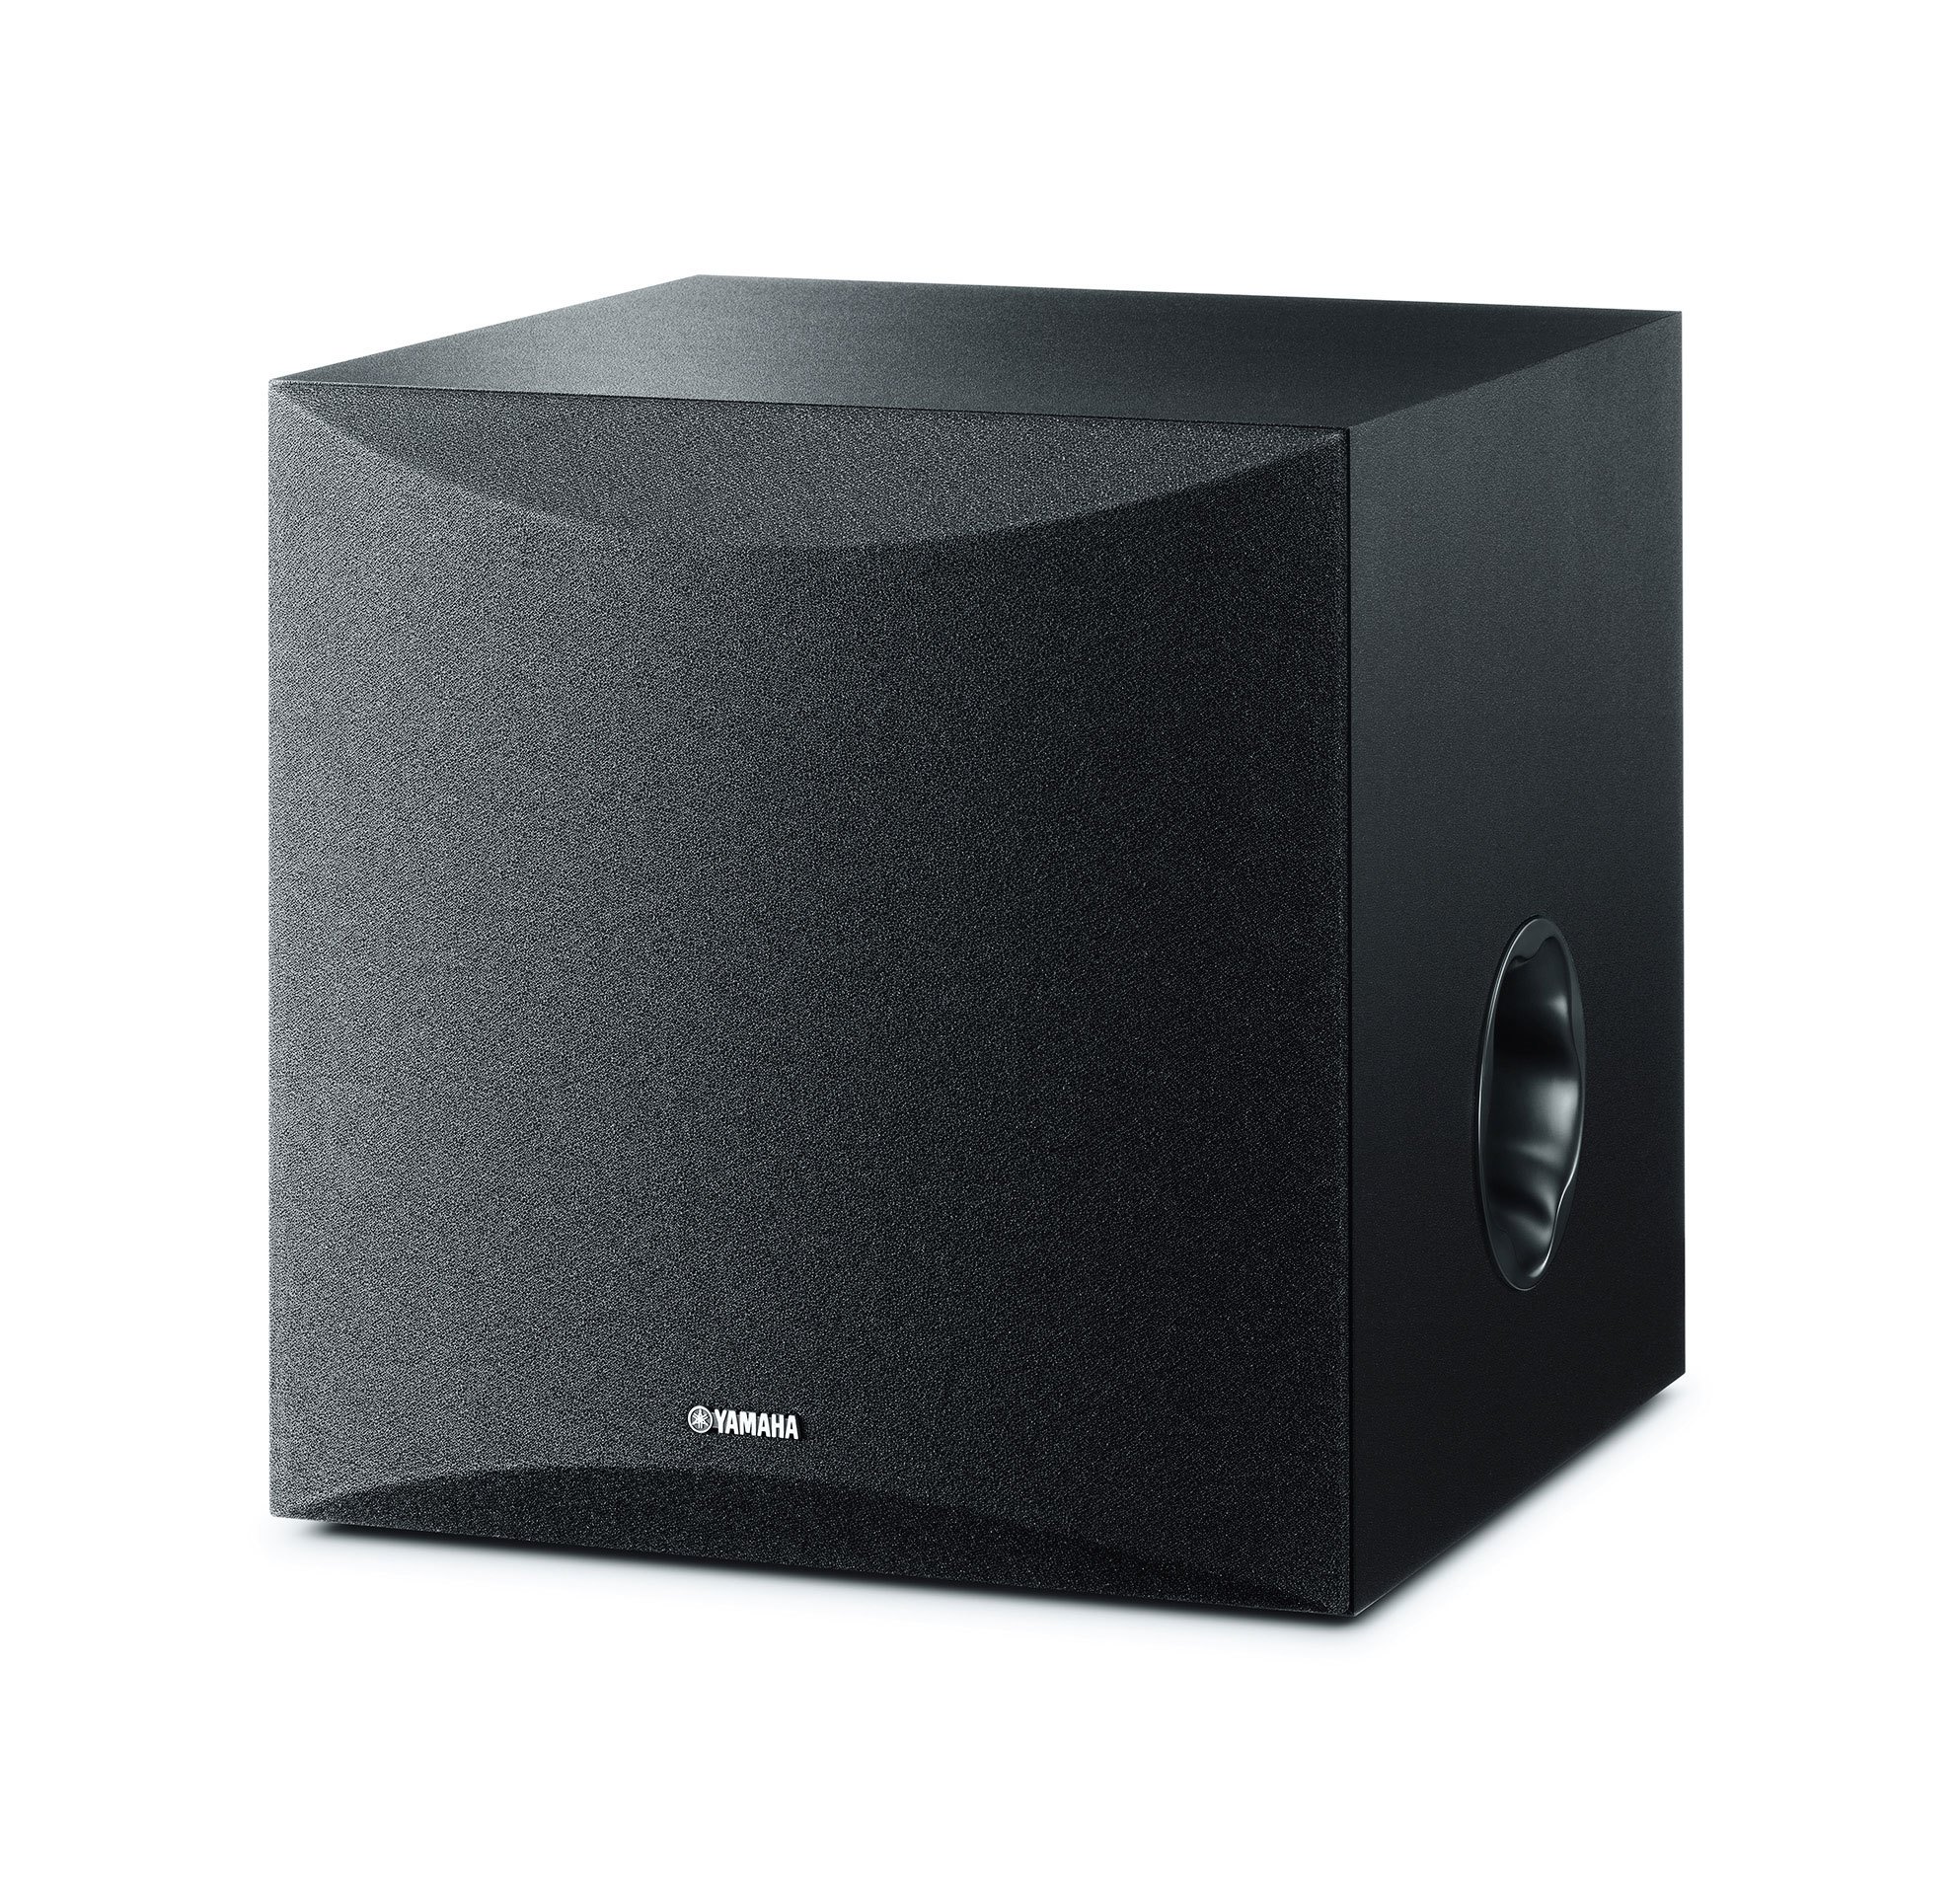 Yamaha NS-SW050 Subwoofer Price in India